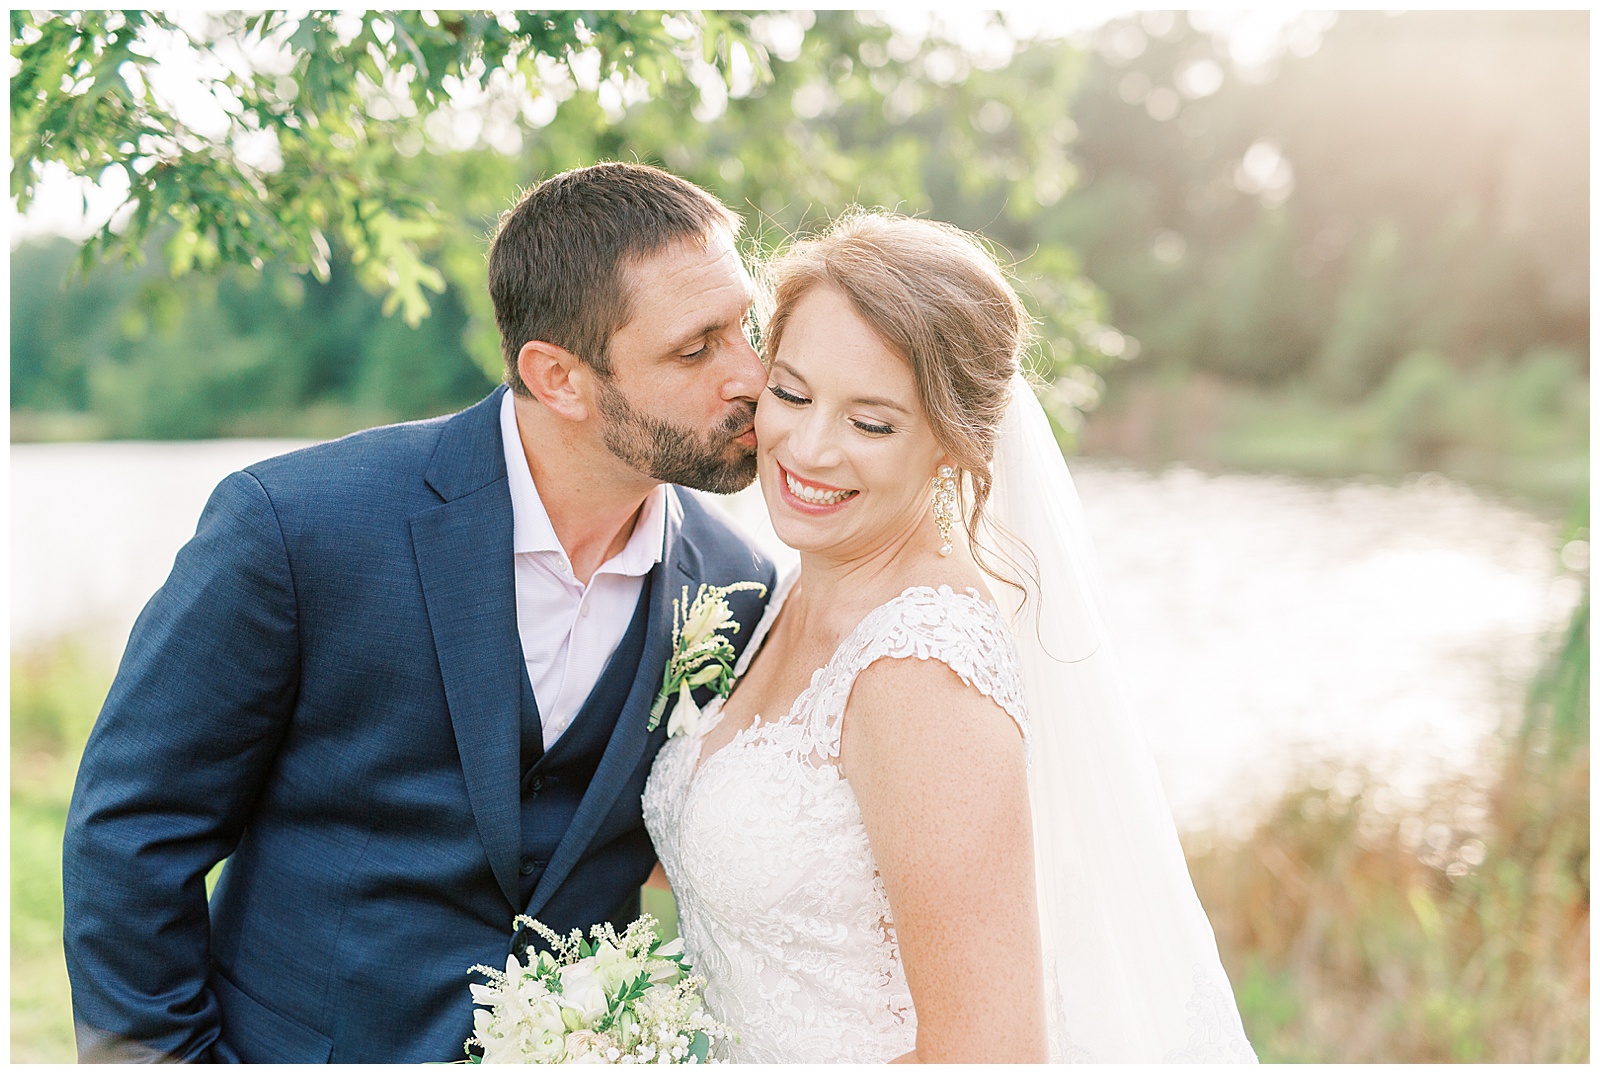 stunning cathedral veil blond haired bride and navy blue suit groom in outdoor summer wedding portraits